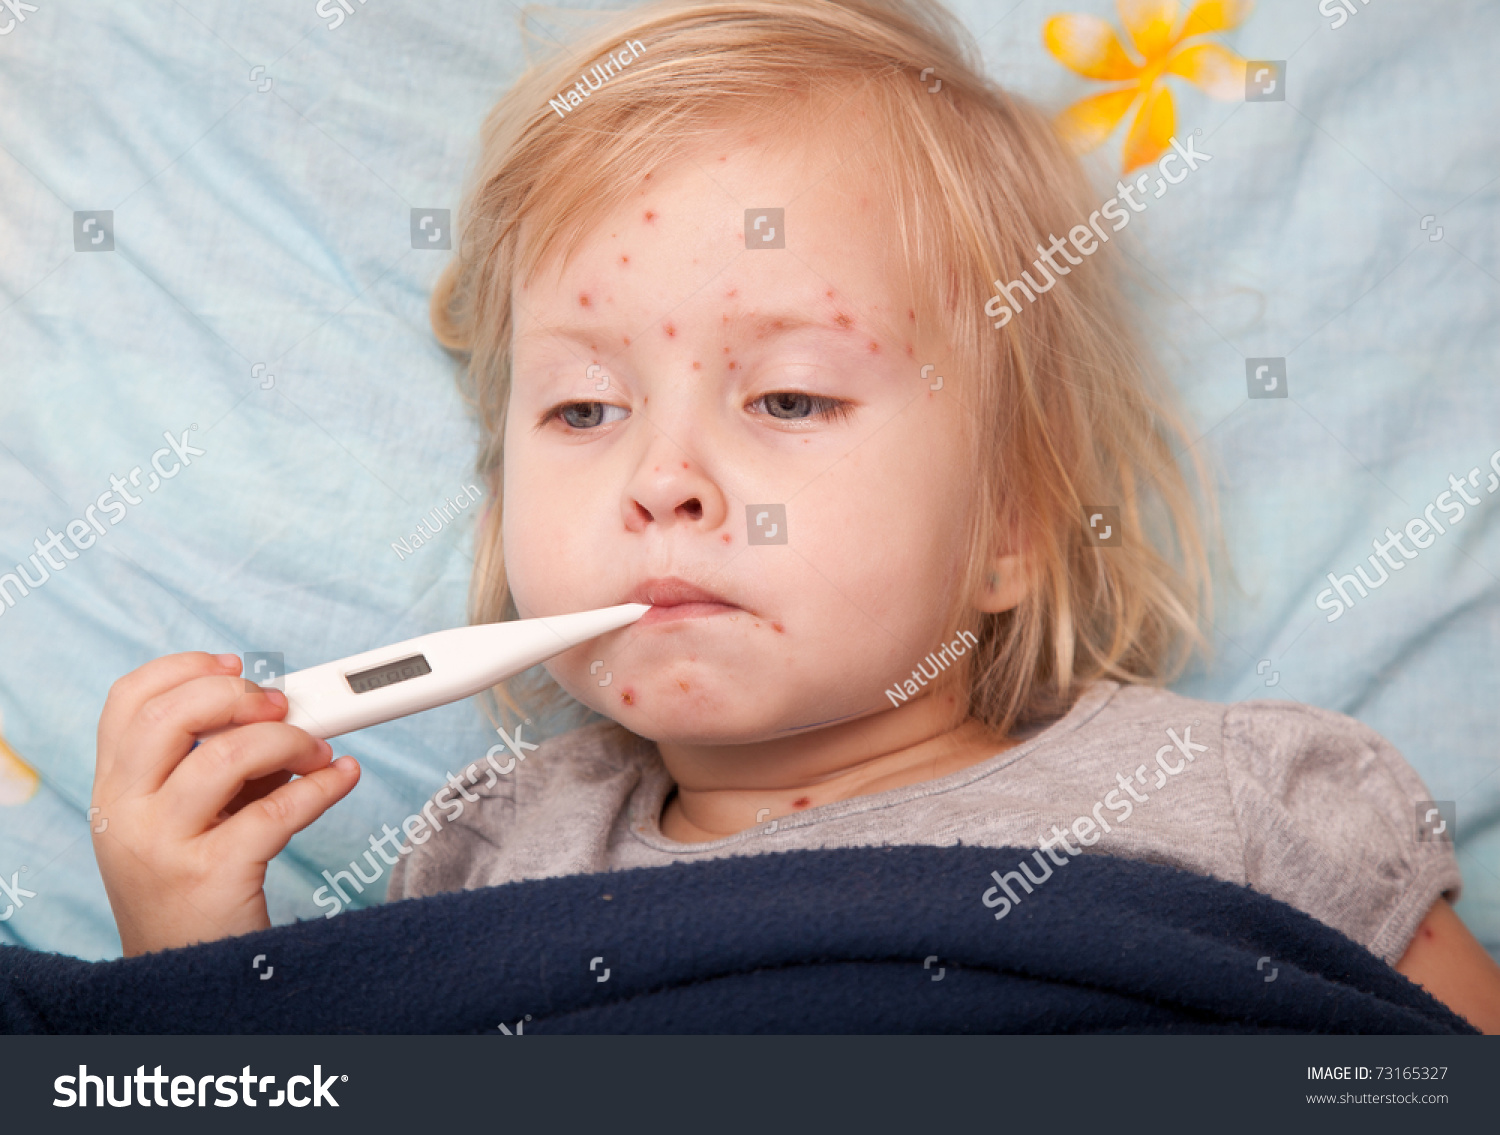 http://image.shutterstock.com/z/stock-photo-a-sick-cute-girl-is-measuring-the-temperature-73165327.jpg